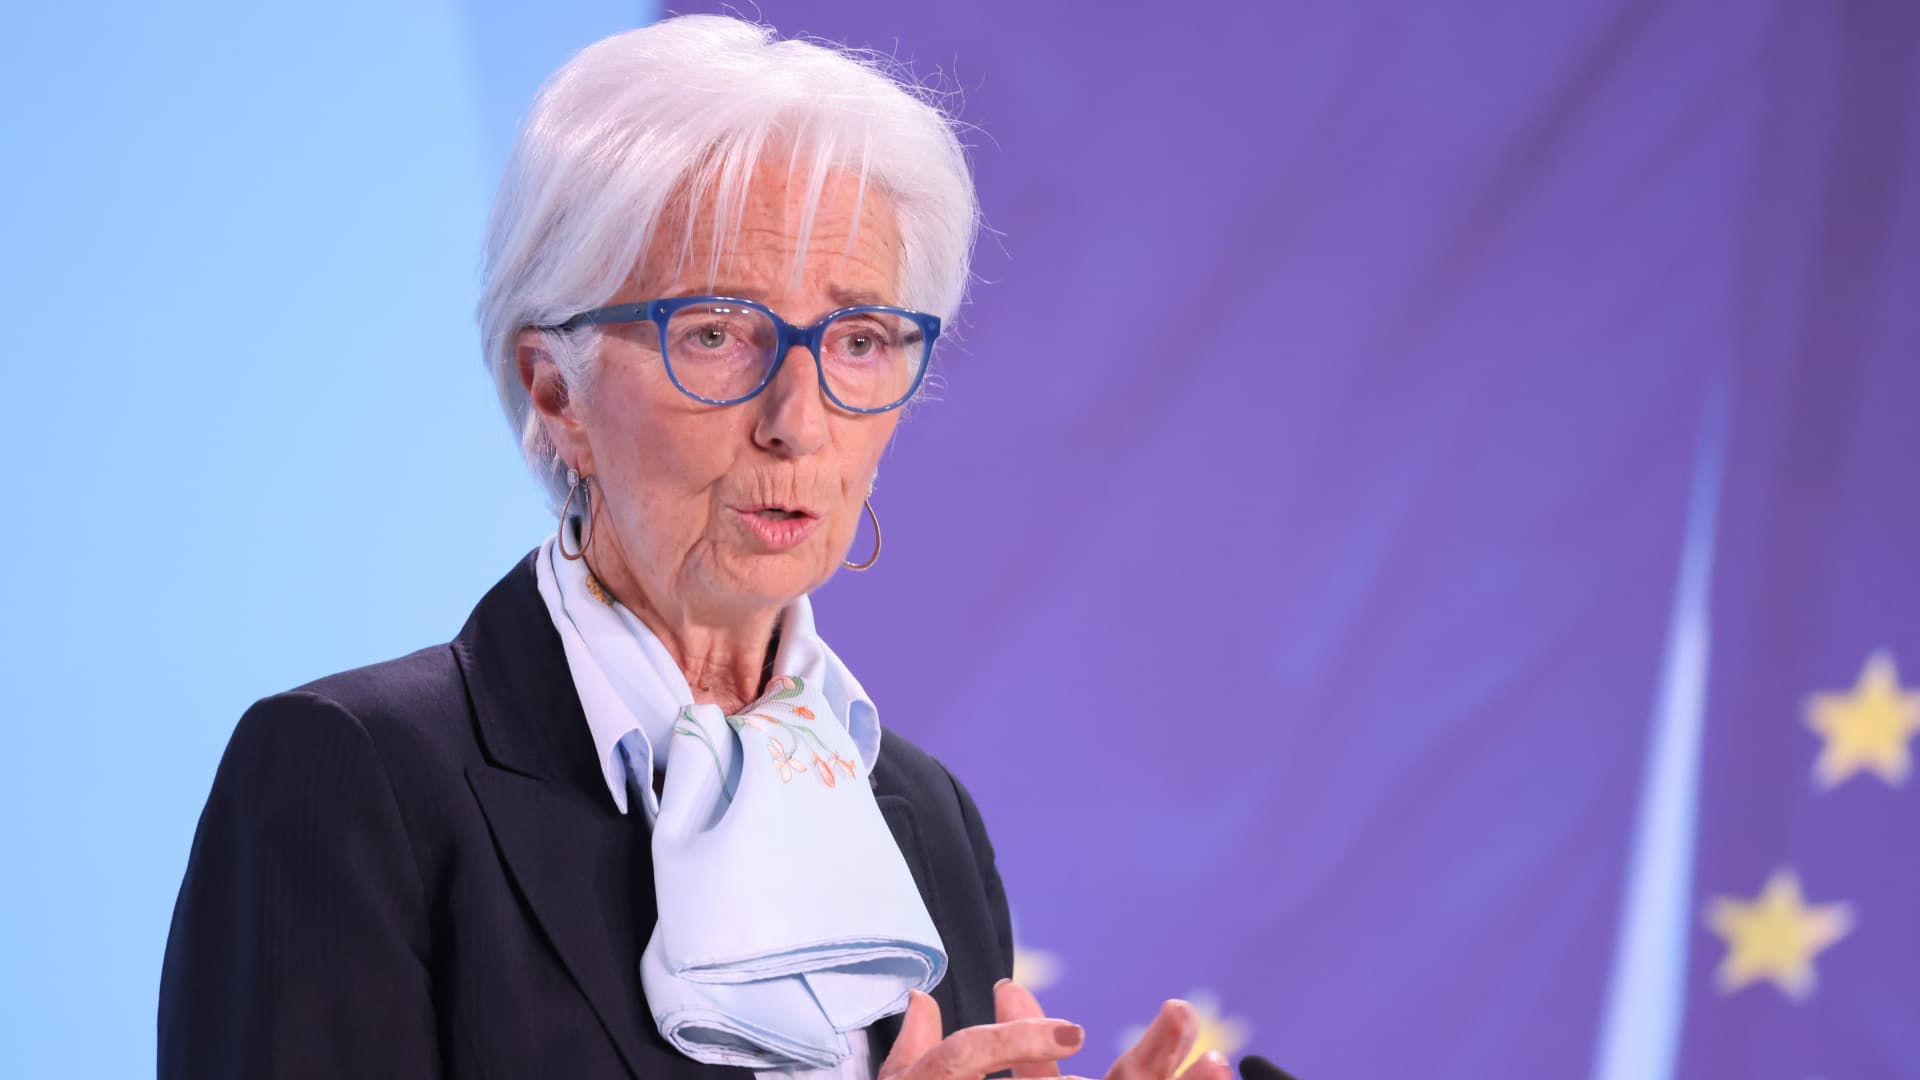 Lagarde says ECB will cut rates soon, barring any major surprises; notes 'extremely attentive' to oil